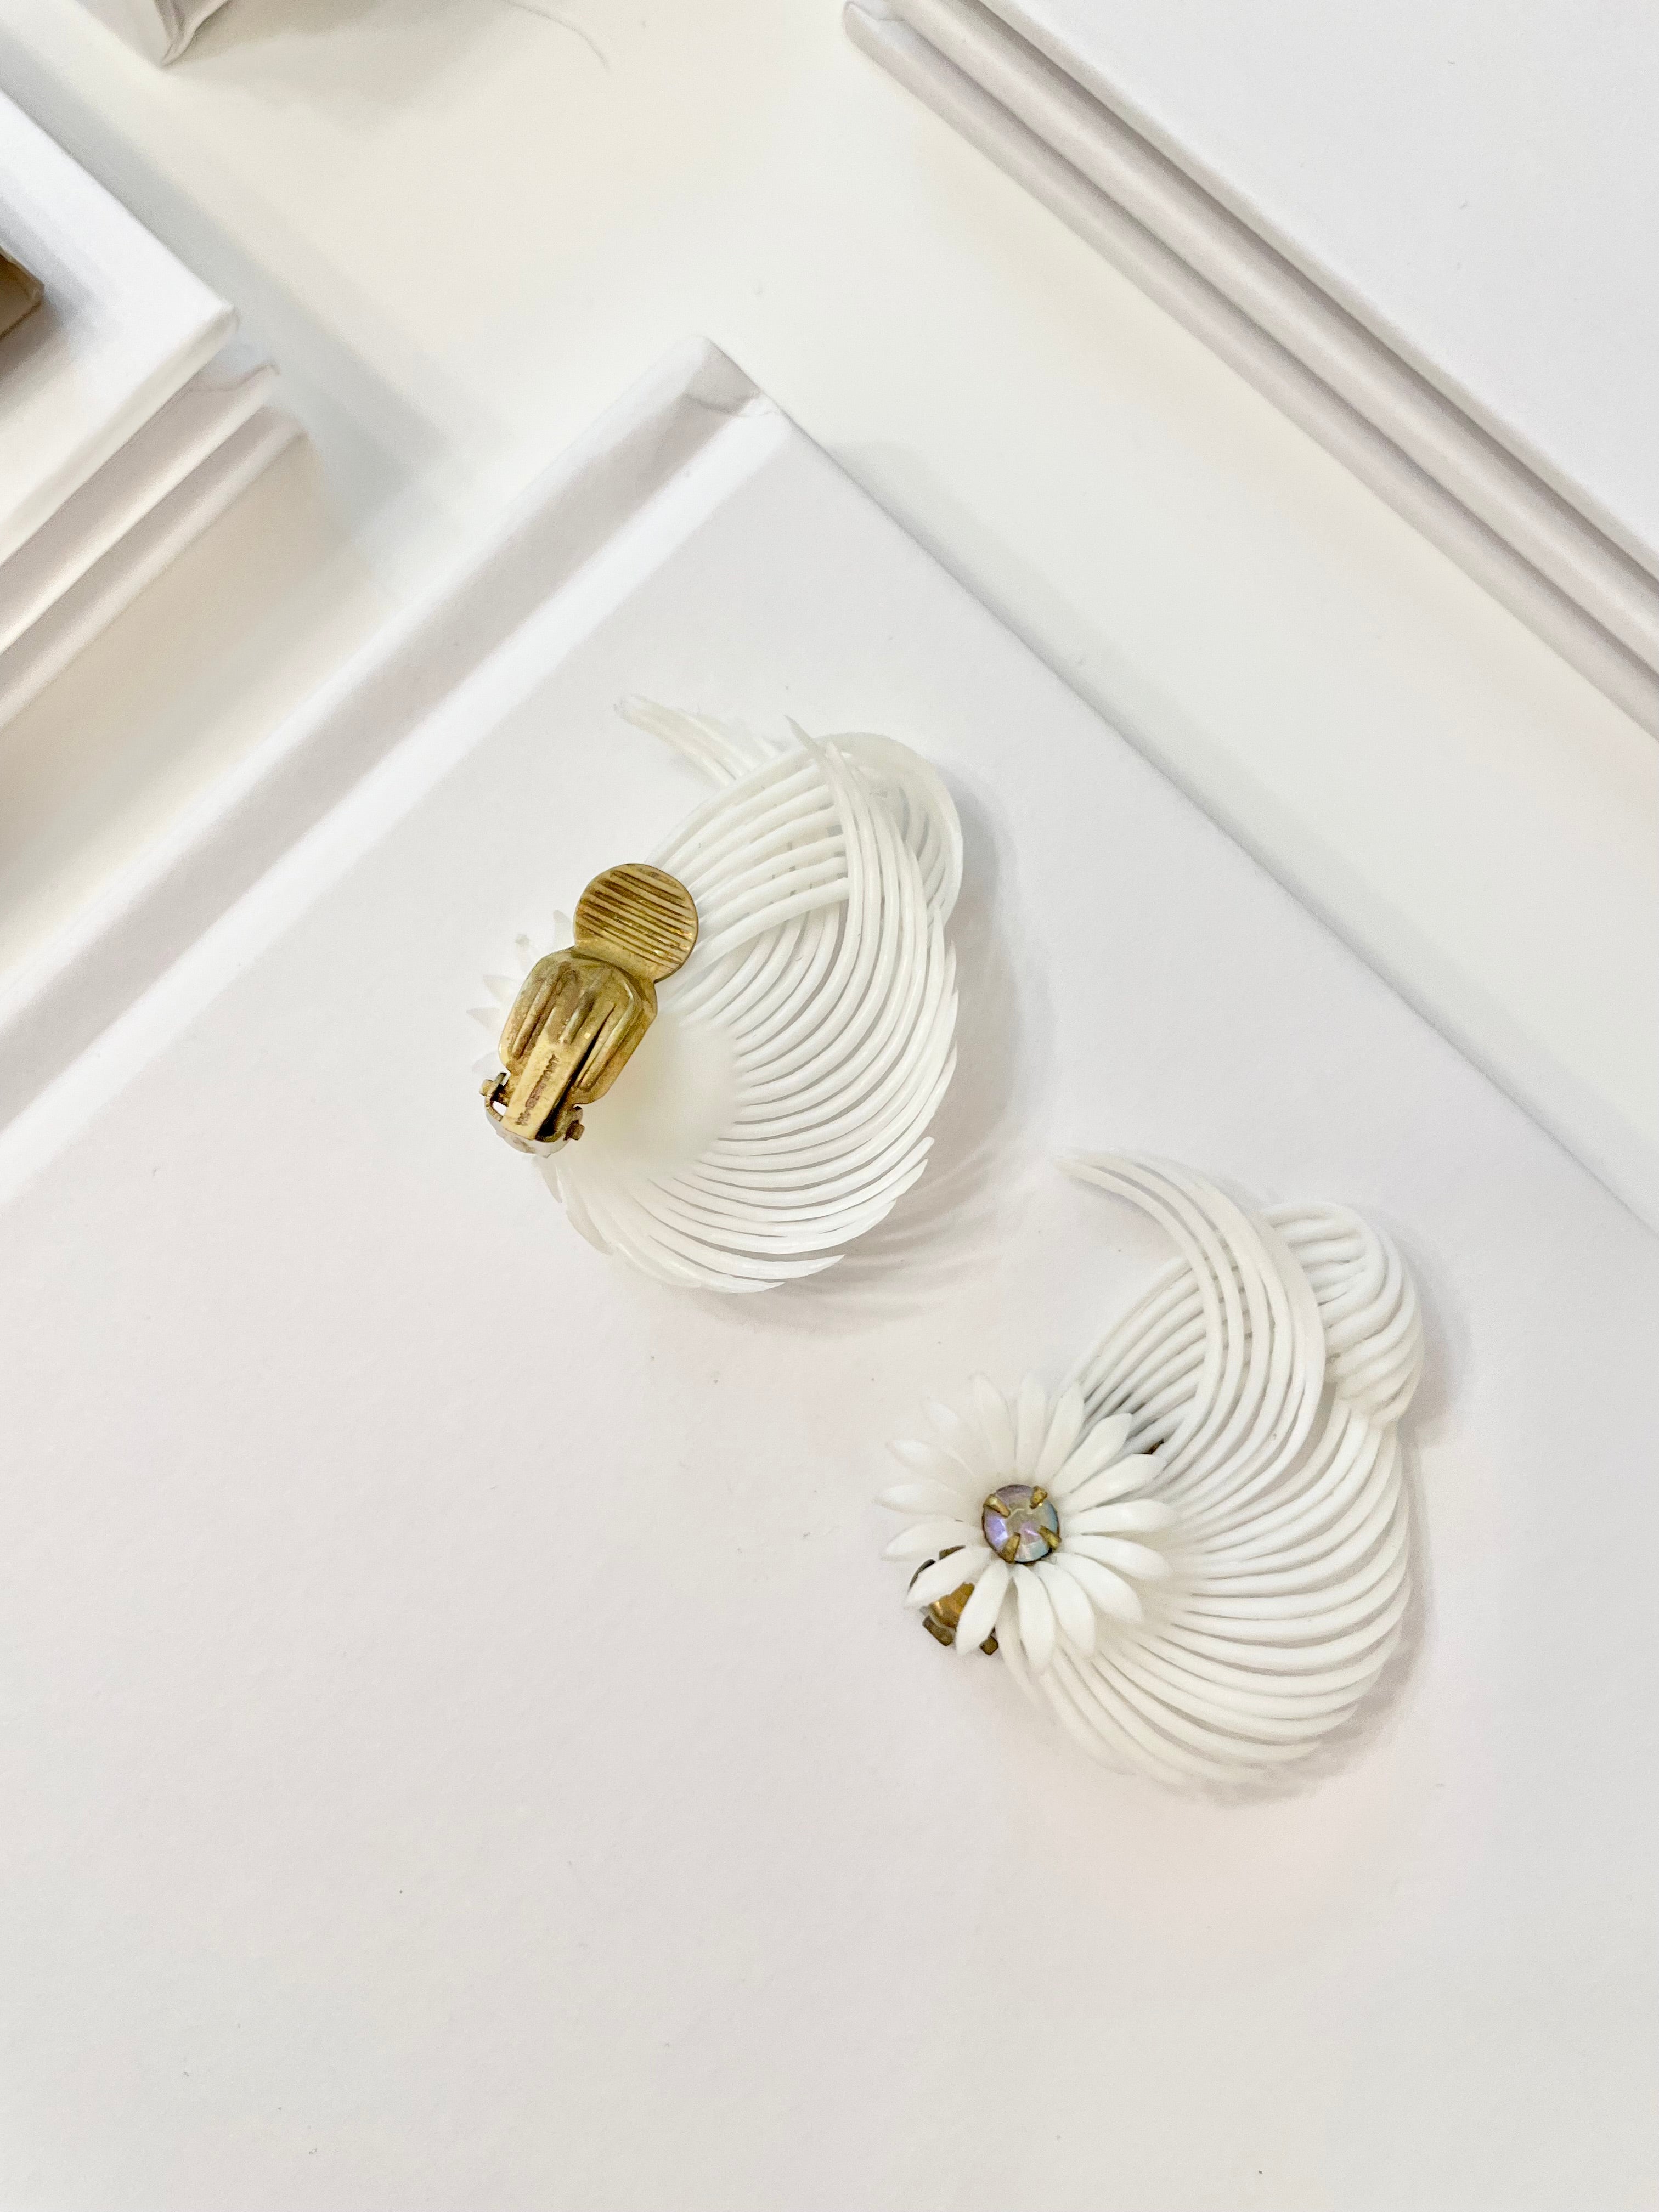 The Cheeky Mistress and her love of the unusual..these 1960's white fan style earrings are so chic!